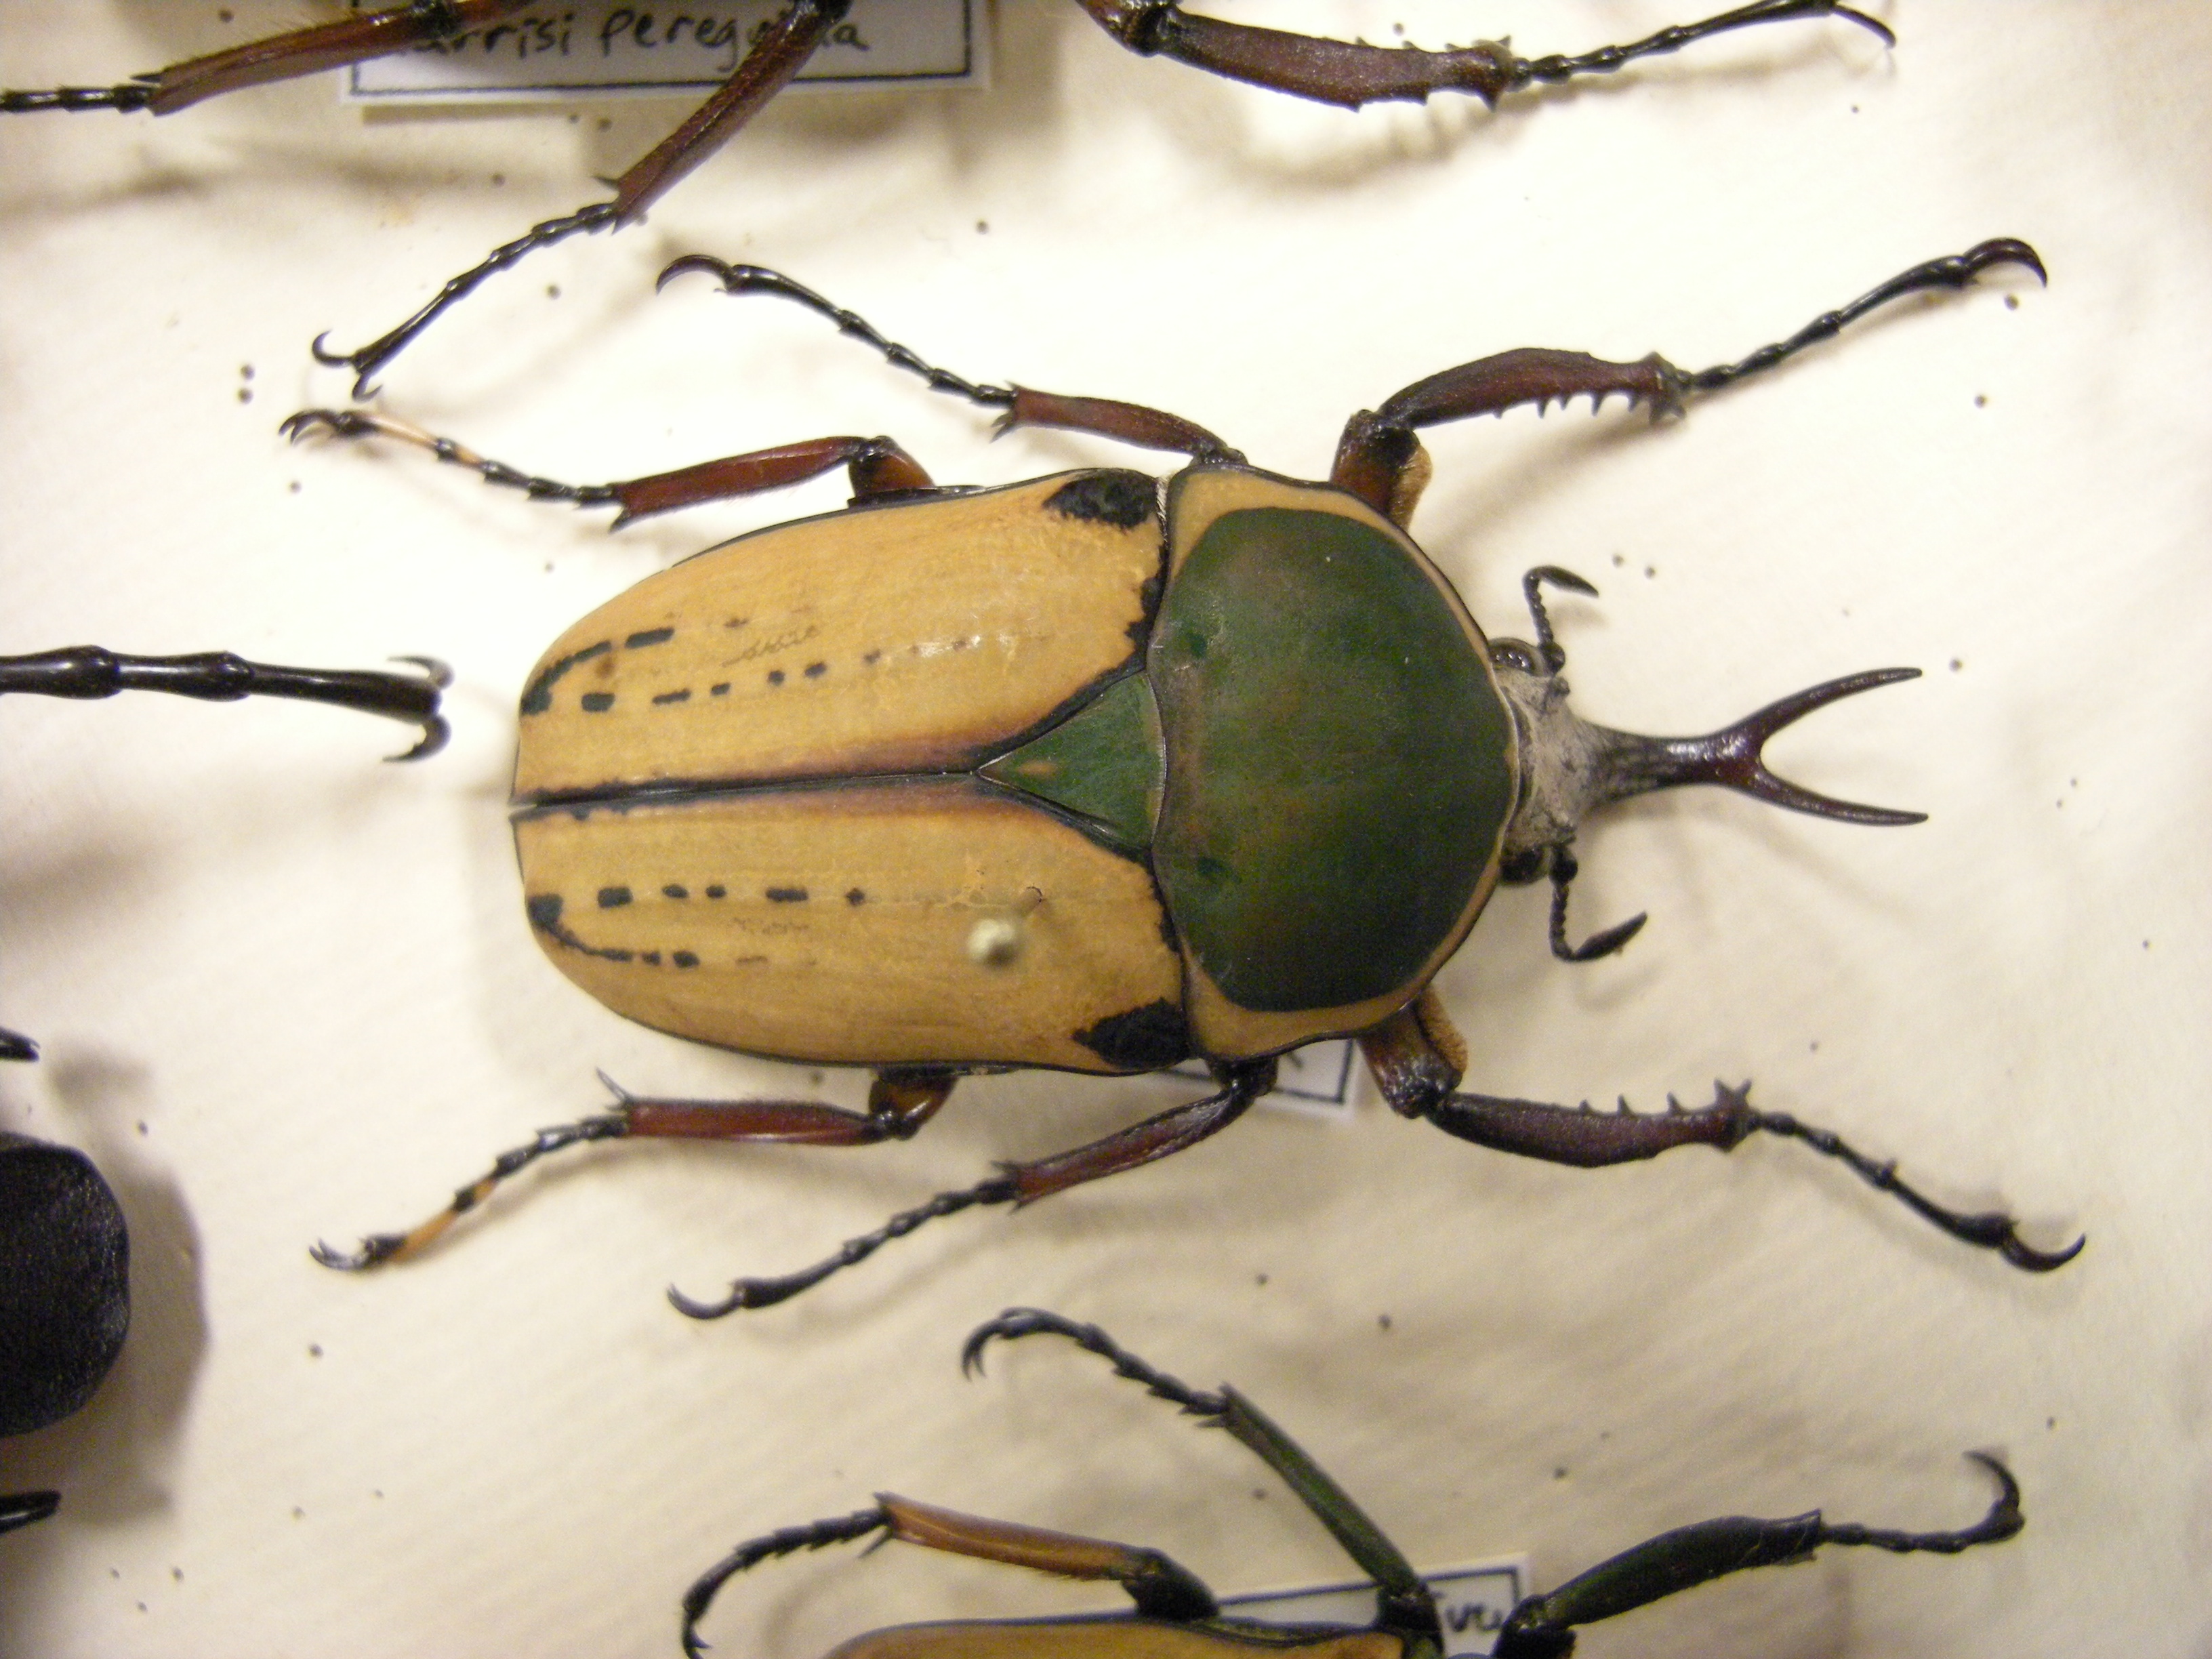 Beetle Insect Images